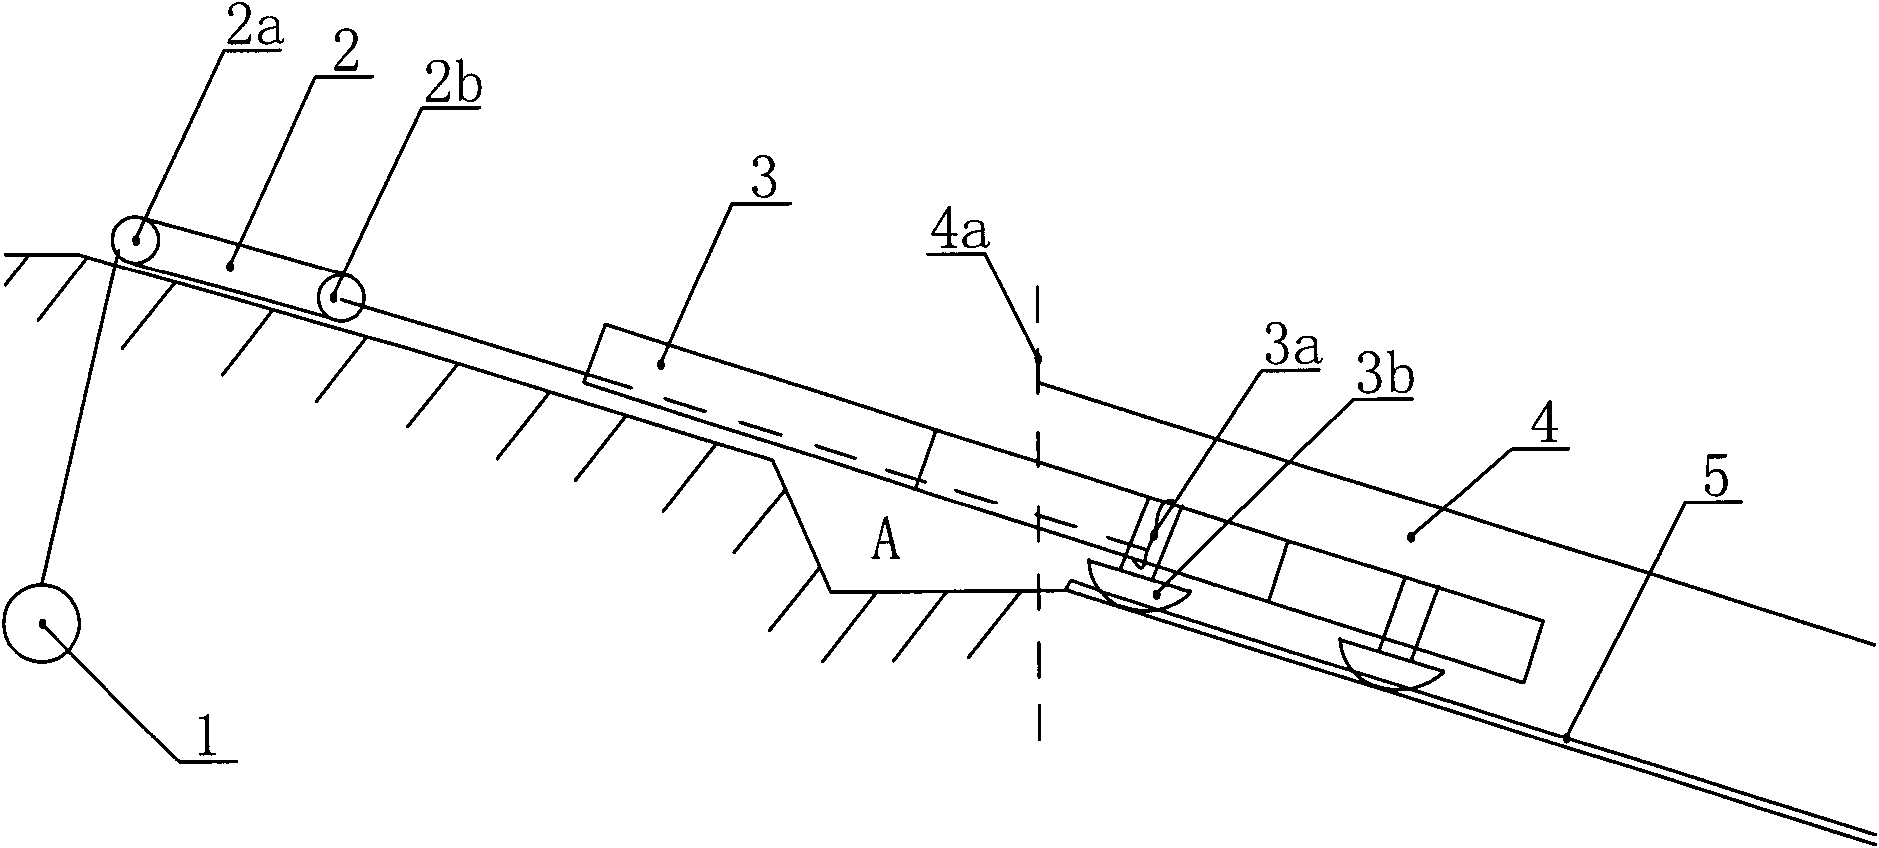 Mounting and construction method of U-shaped tunnel pipelines